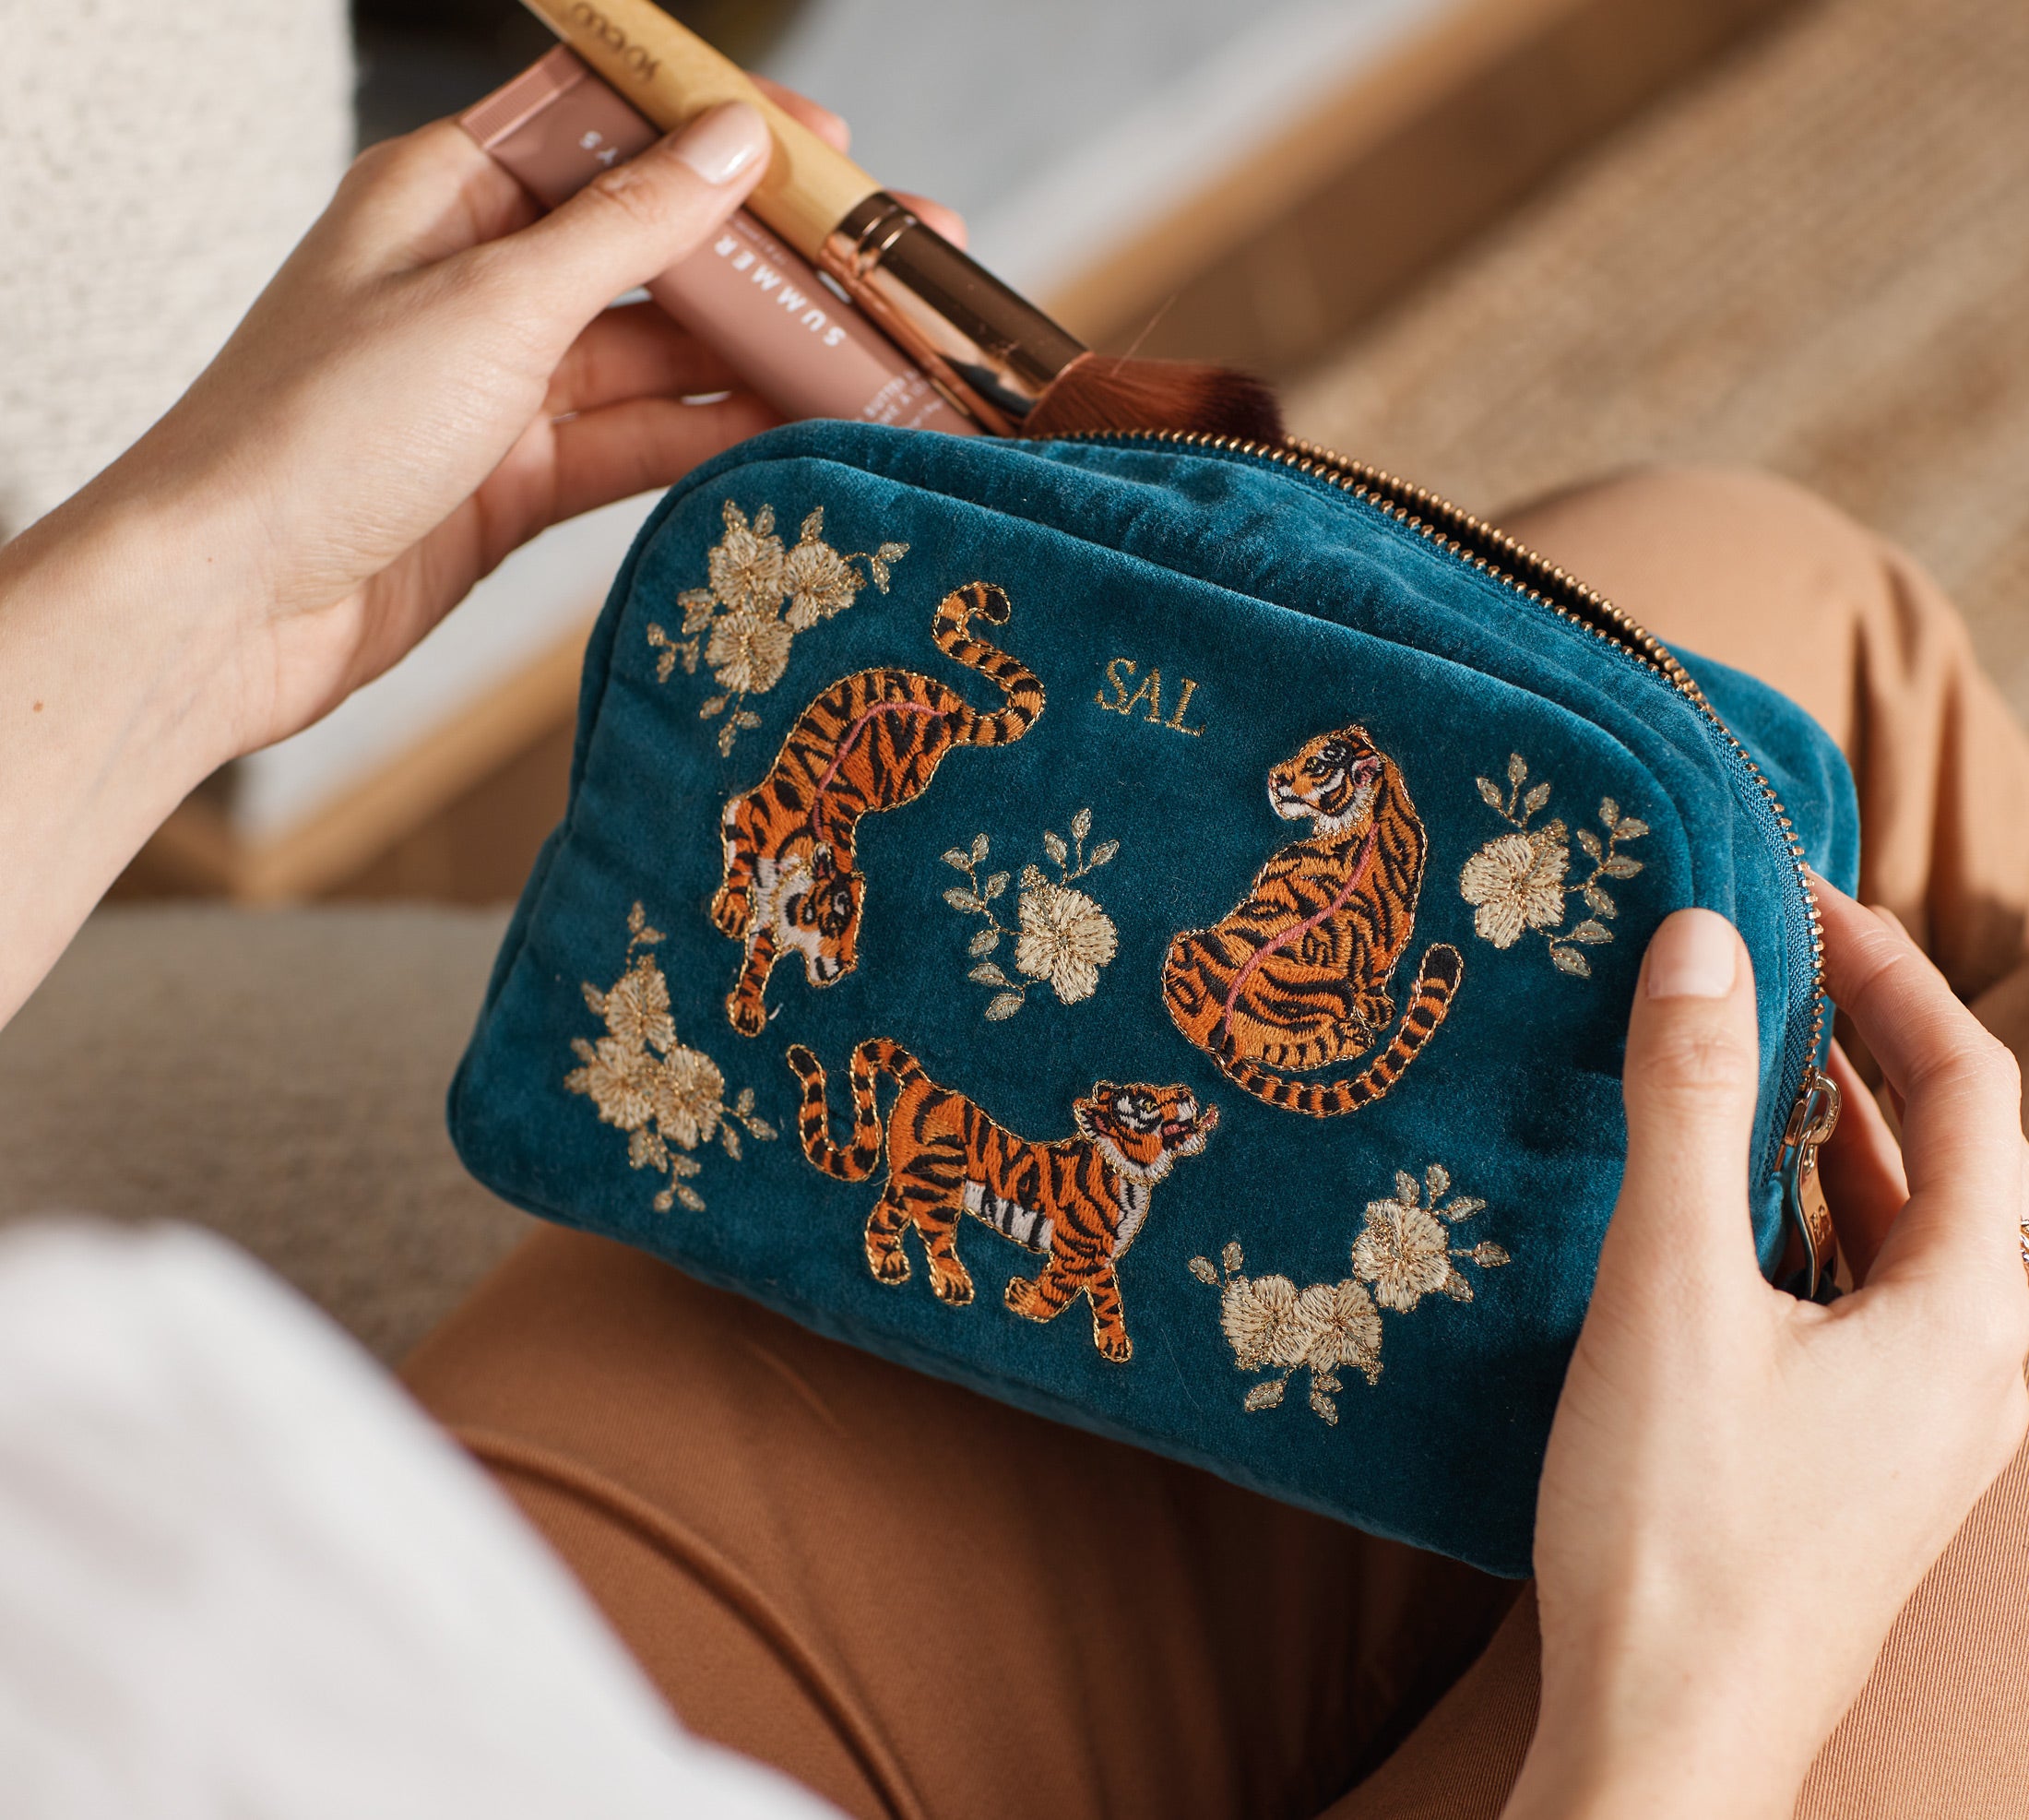 Pencil Carry-All Pouches to Match Your Personal Style